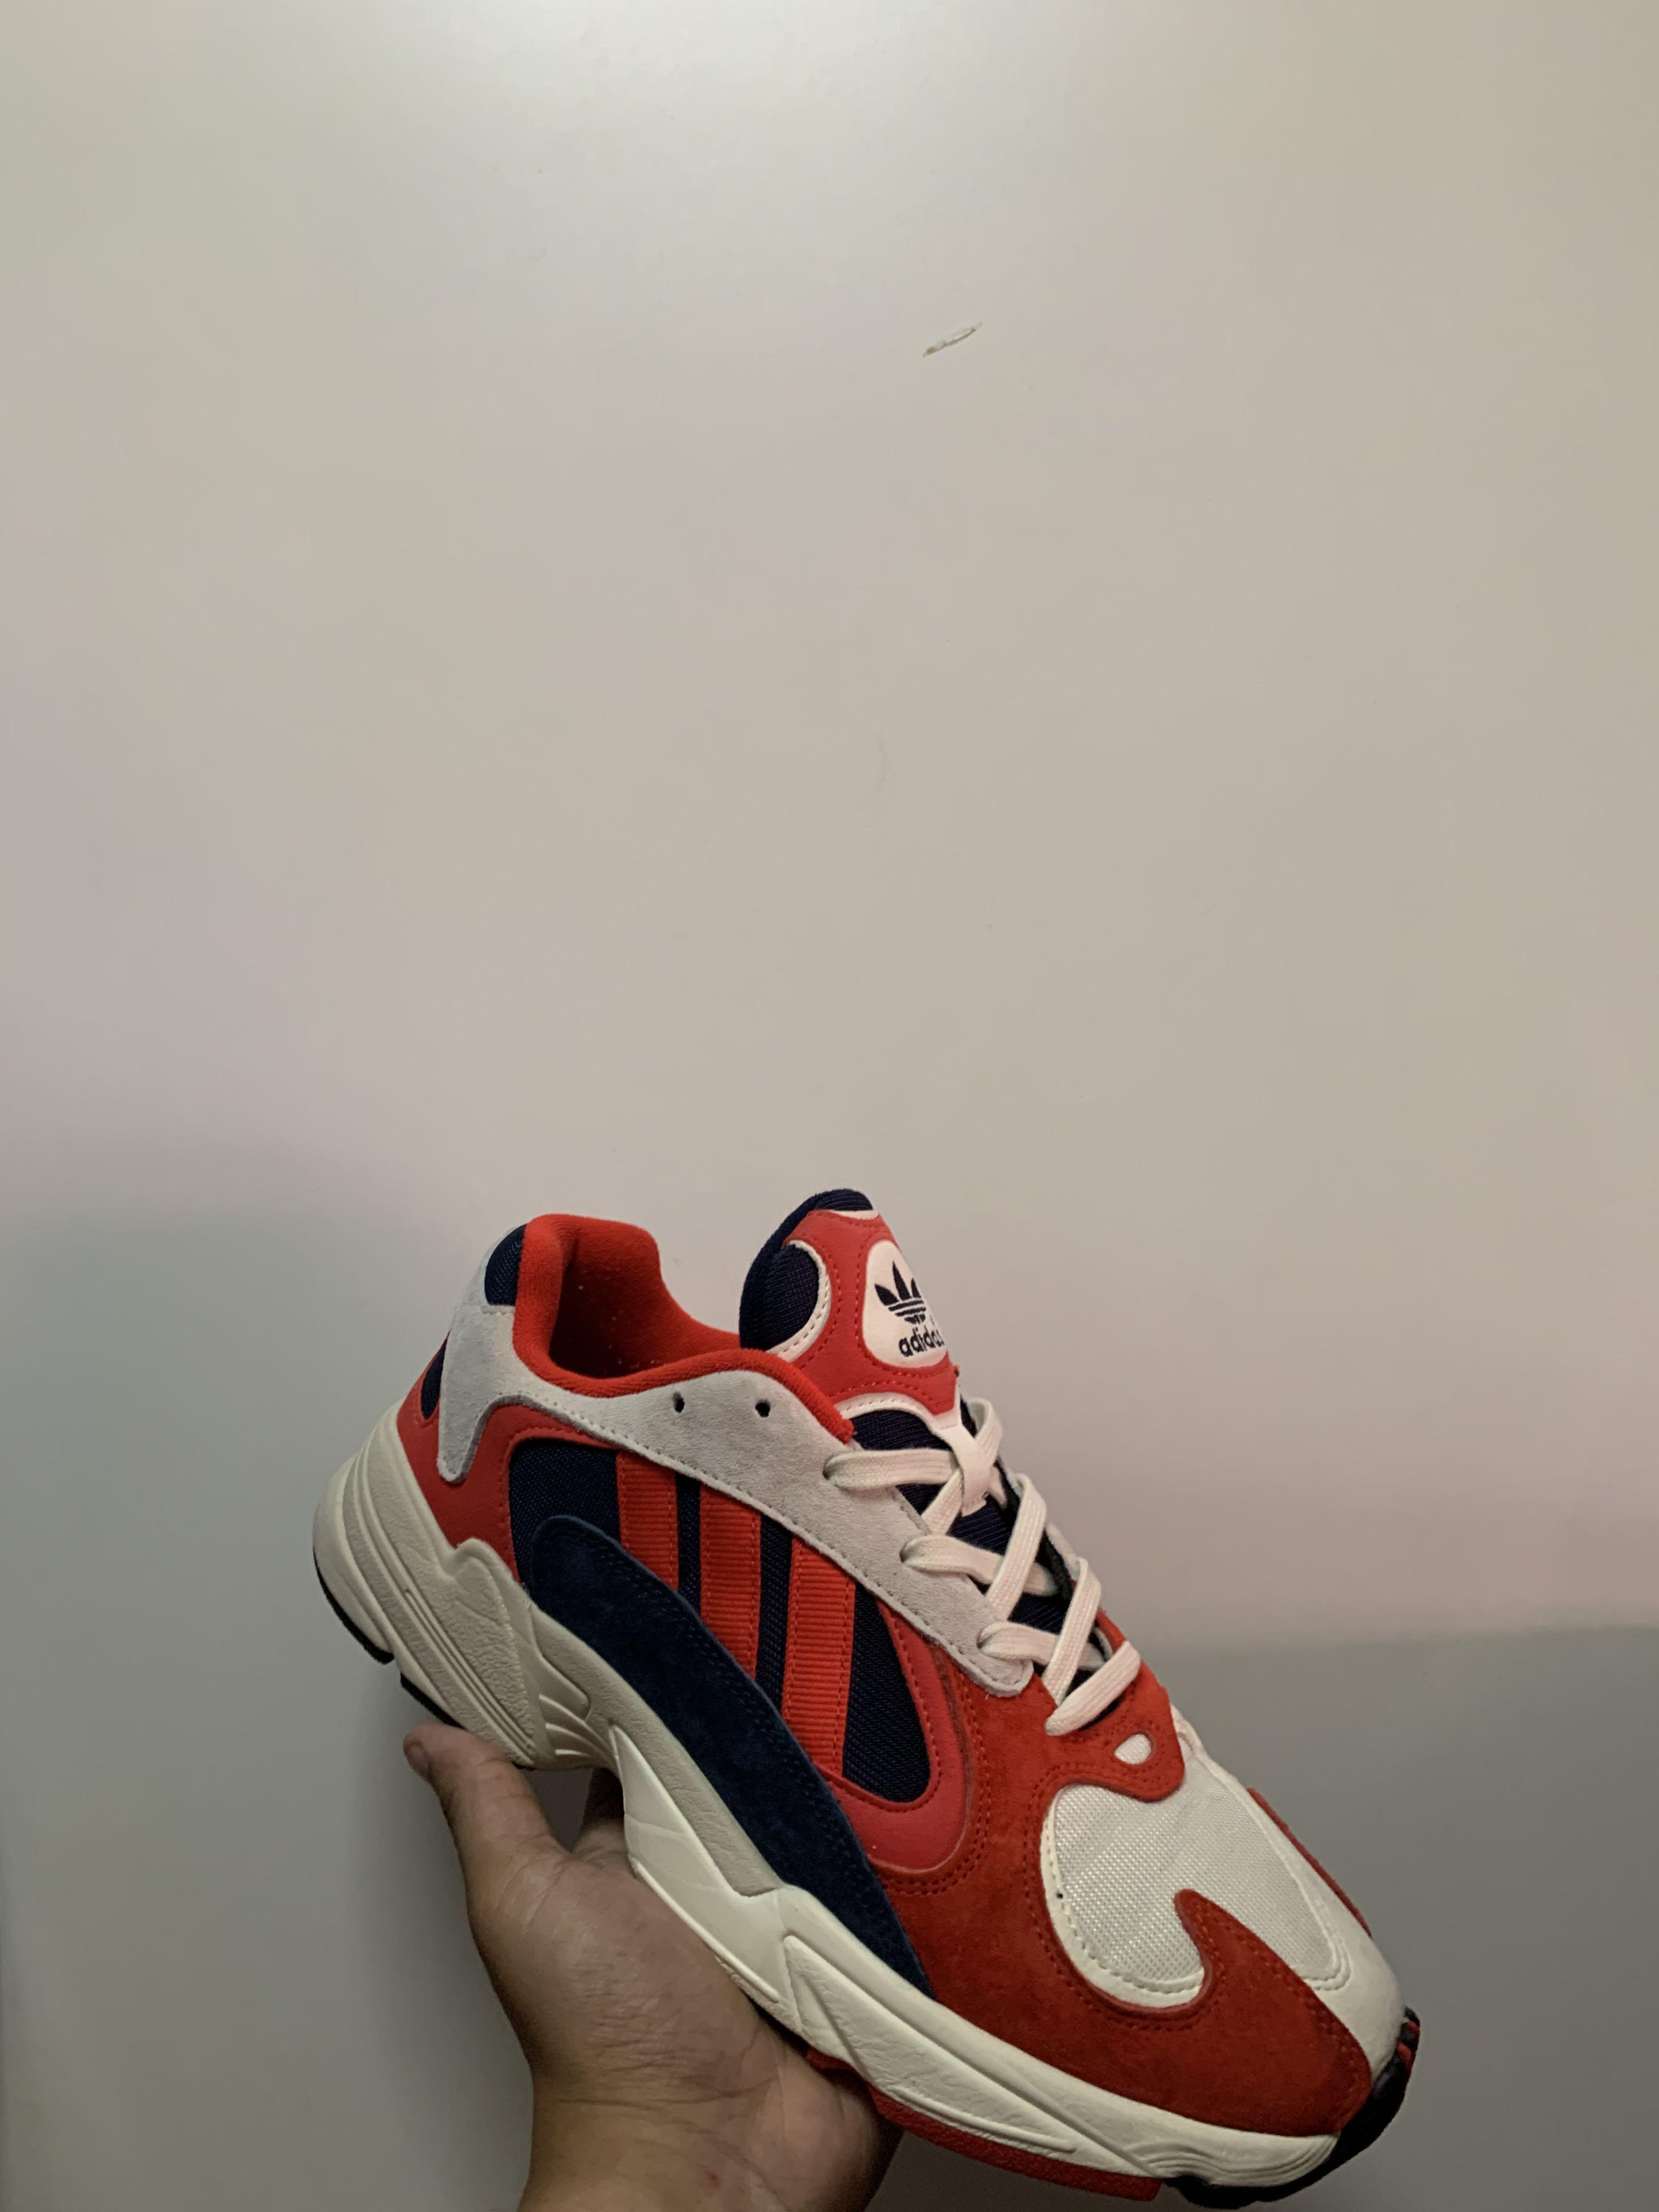 Adidas Yung 1 OG, Men's Fashion, Footwear, Sneakers on Carousell